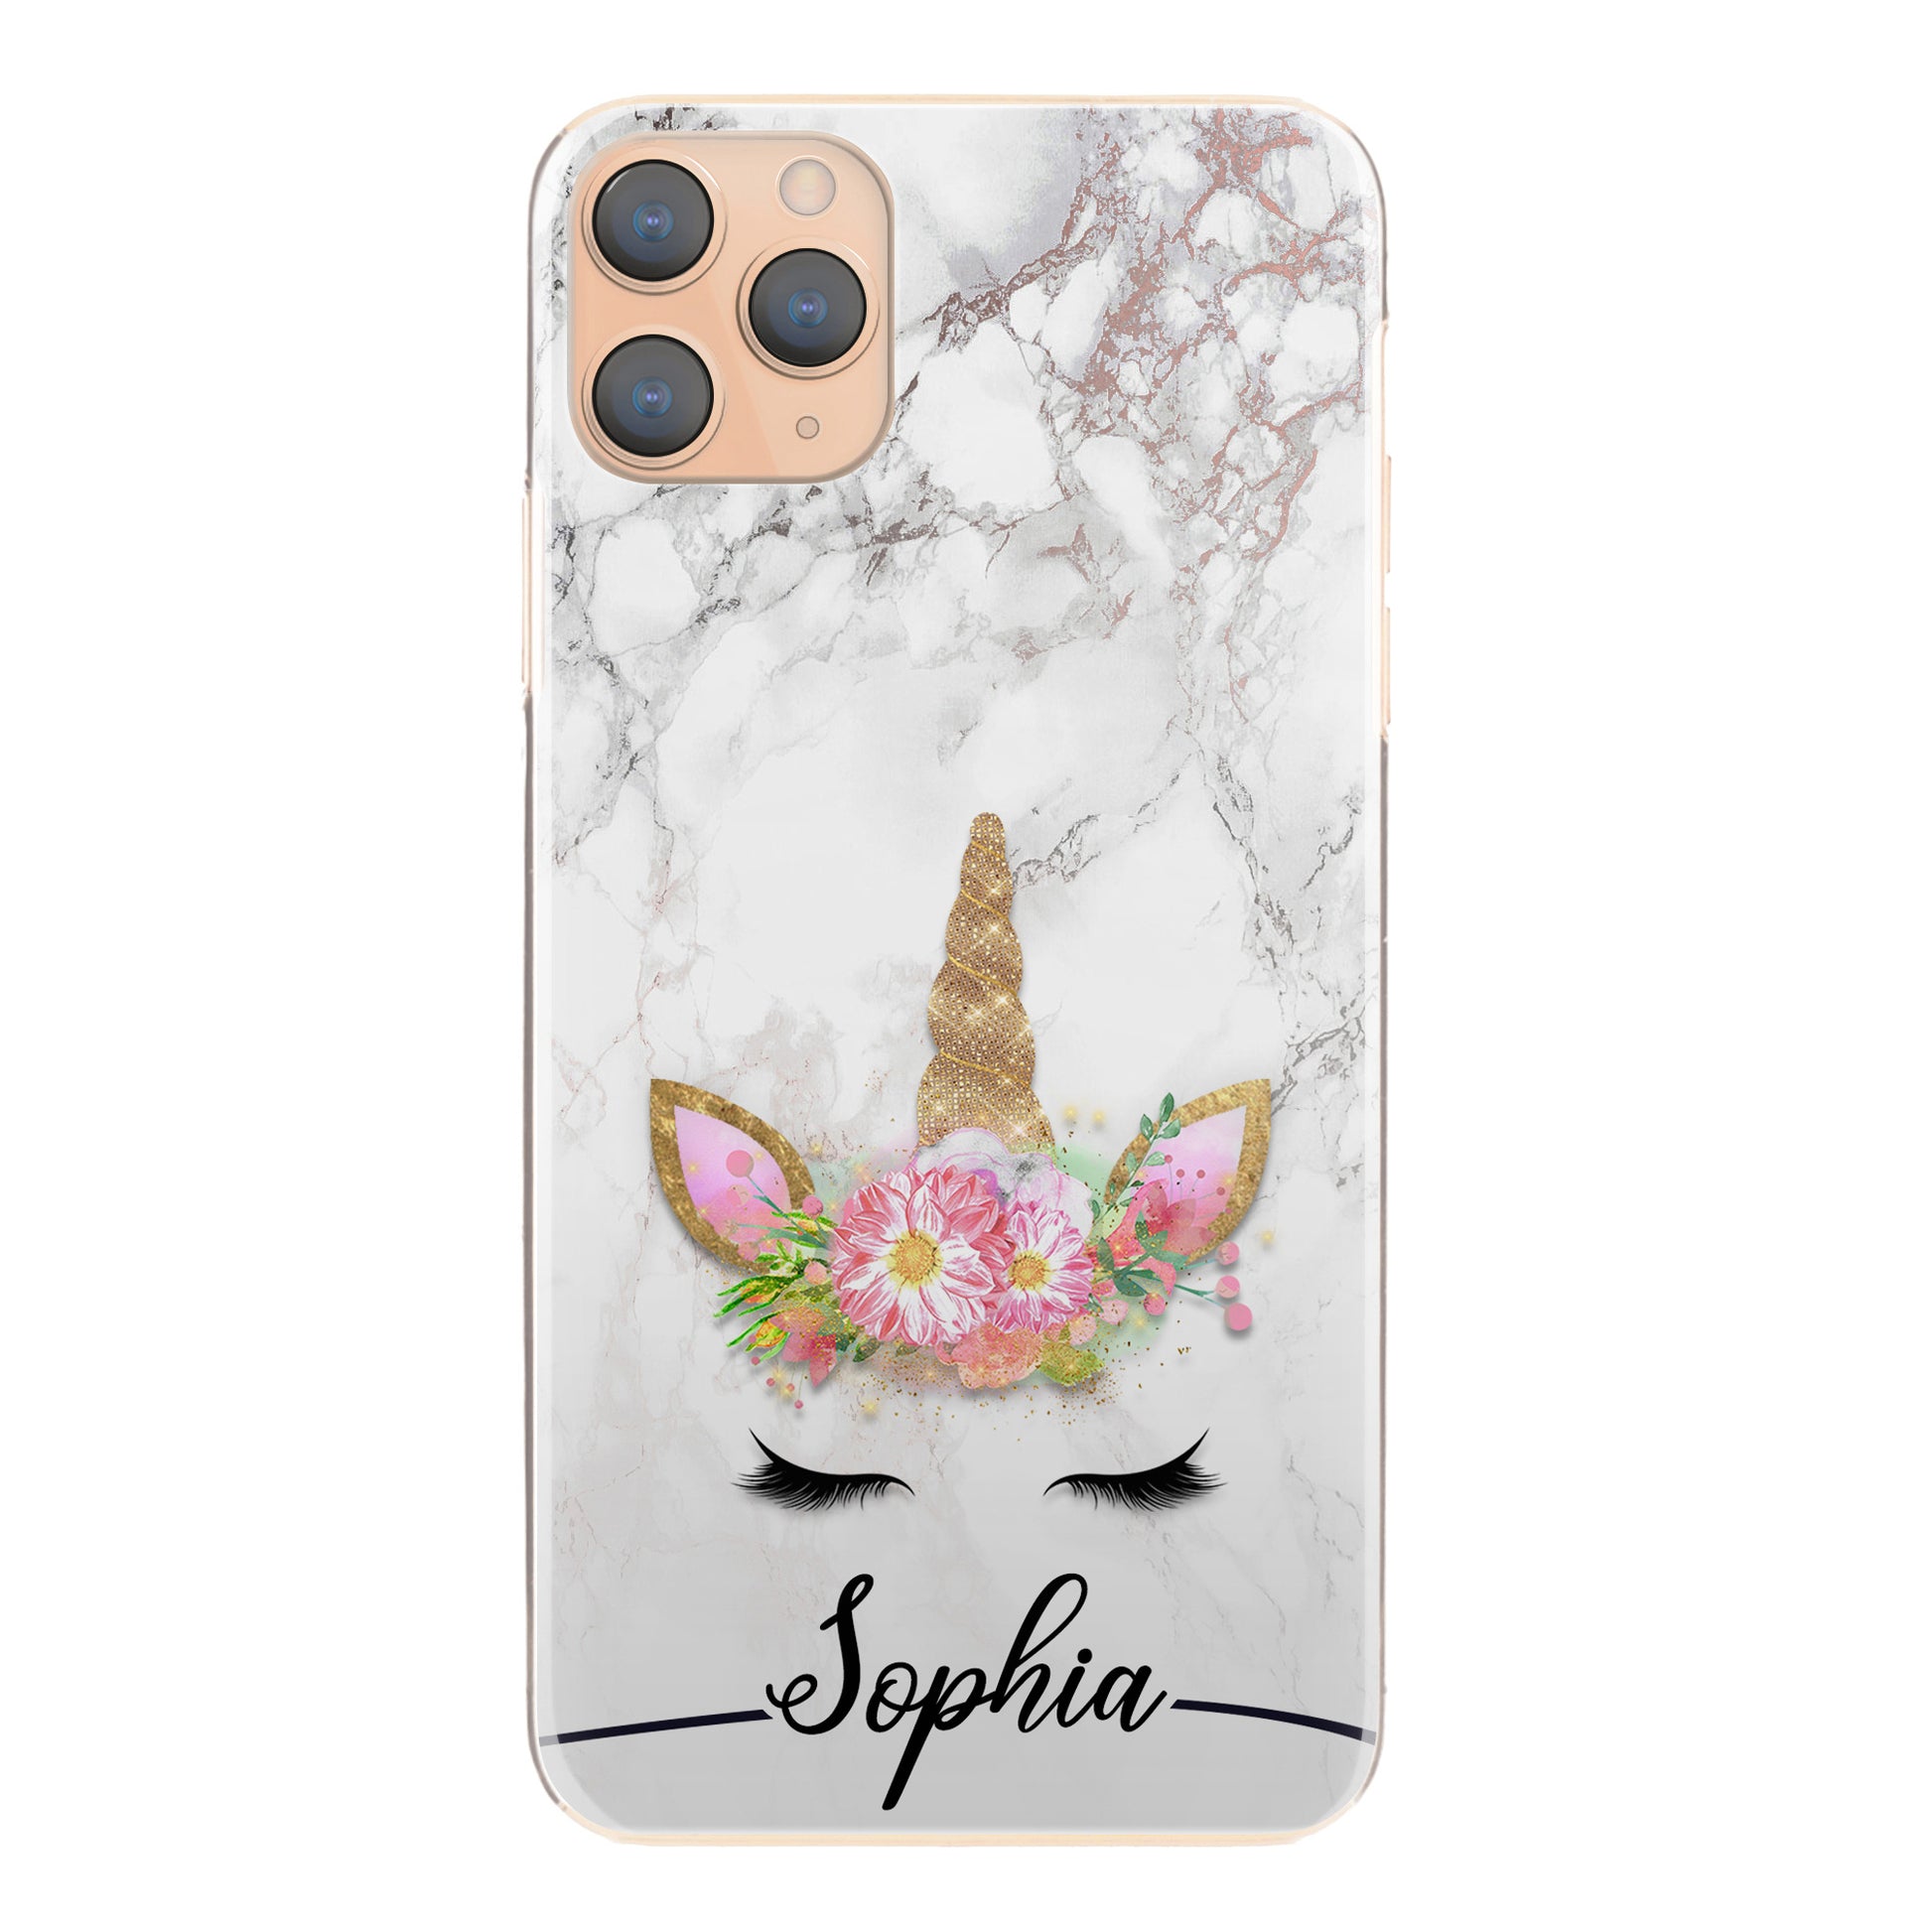 Personalised Samsung Galaxy Phone Hard Case with Gold Floral Unicorn and Text on Grey Marble